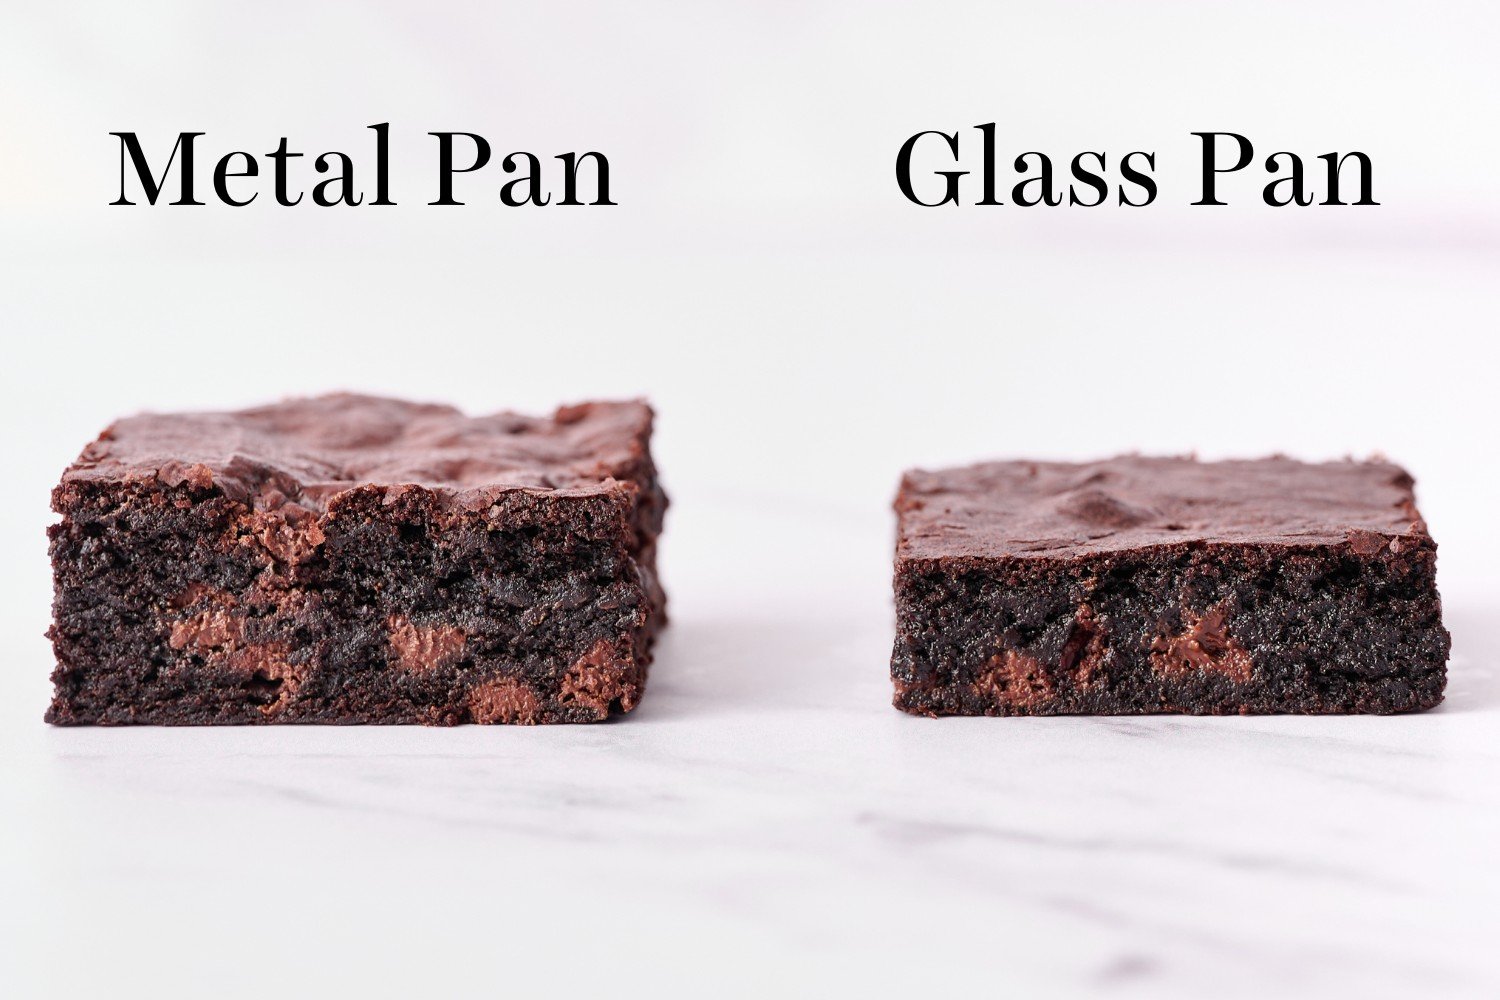 two slices of brownies side-by-side: one was baked in a metal pan and is tall and chewy, and the other was baked in a glass pan, and is short and gummy.